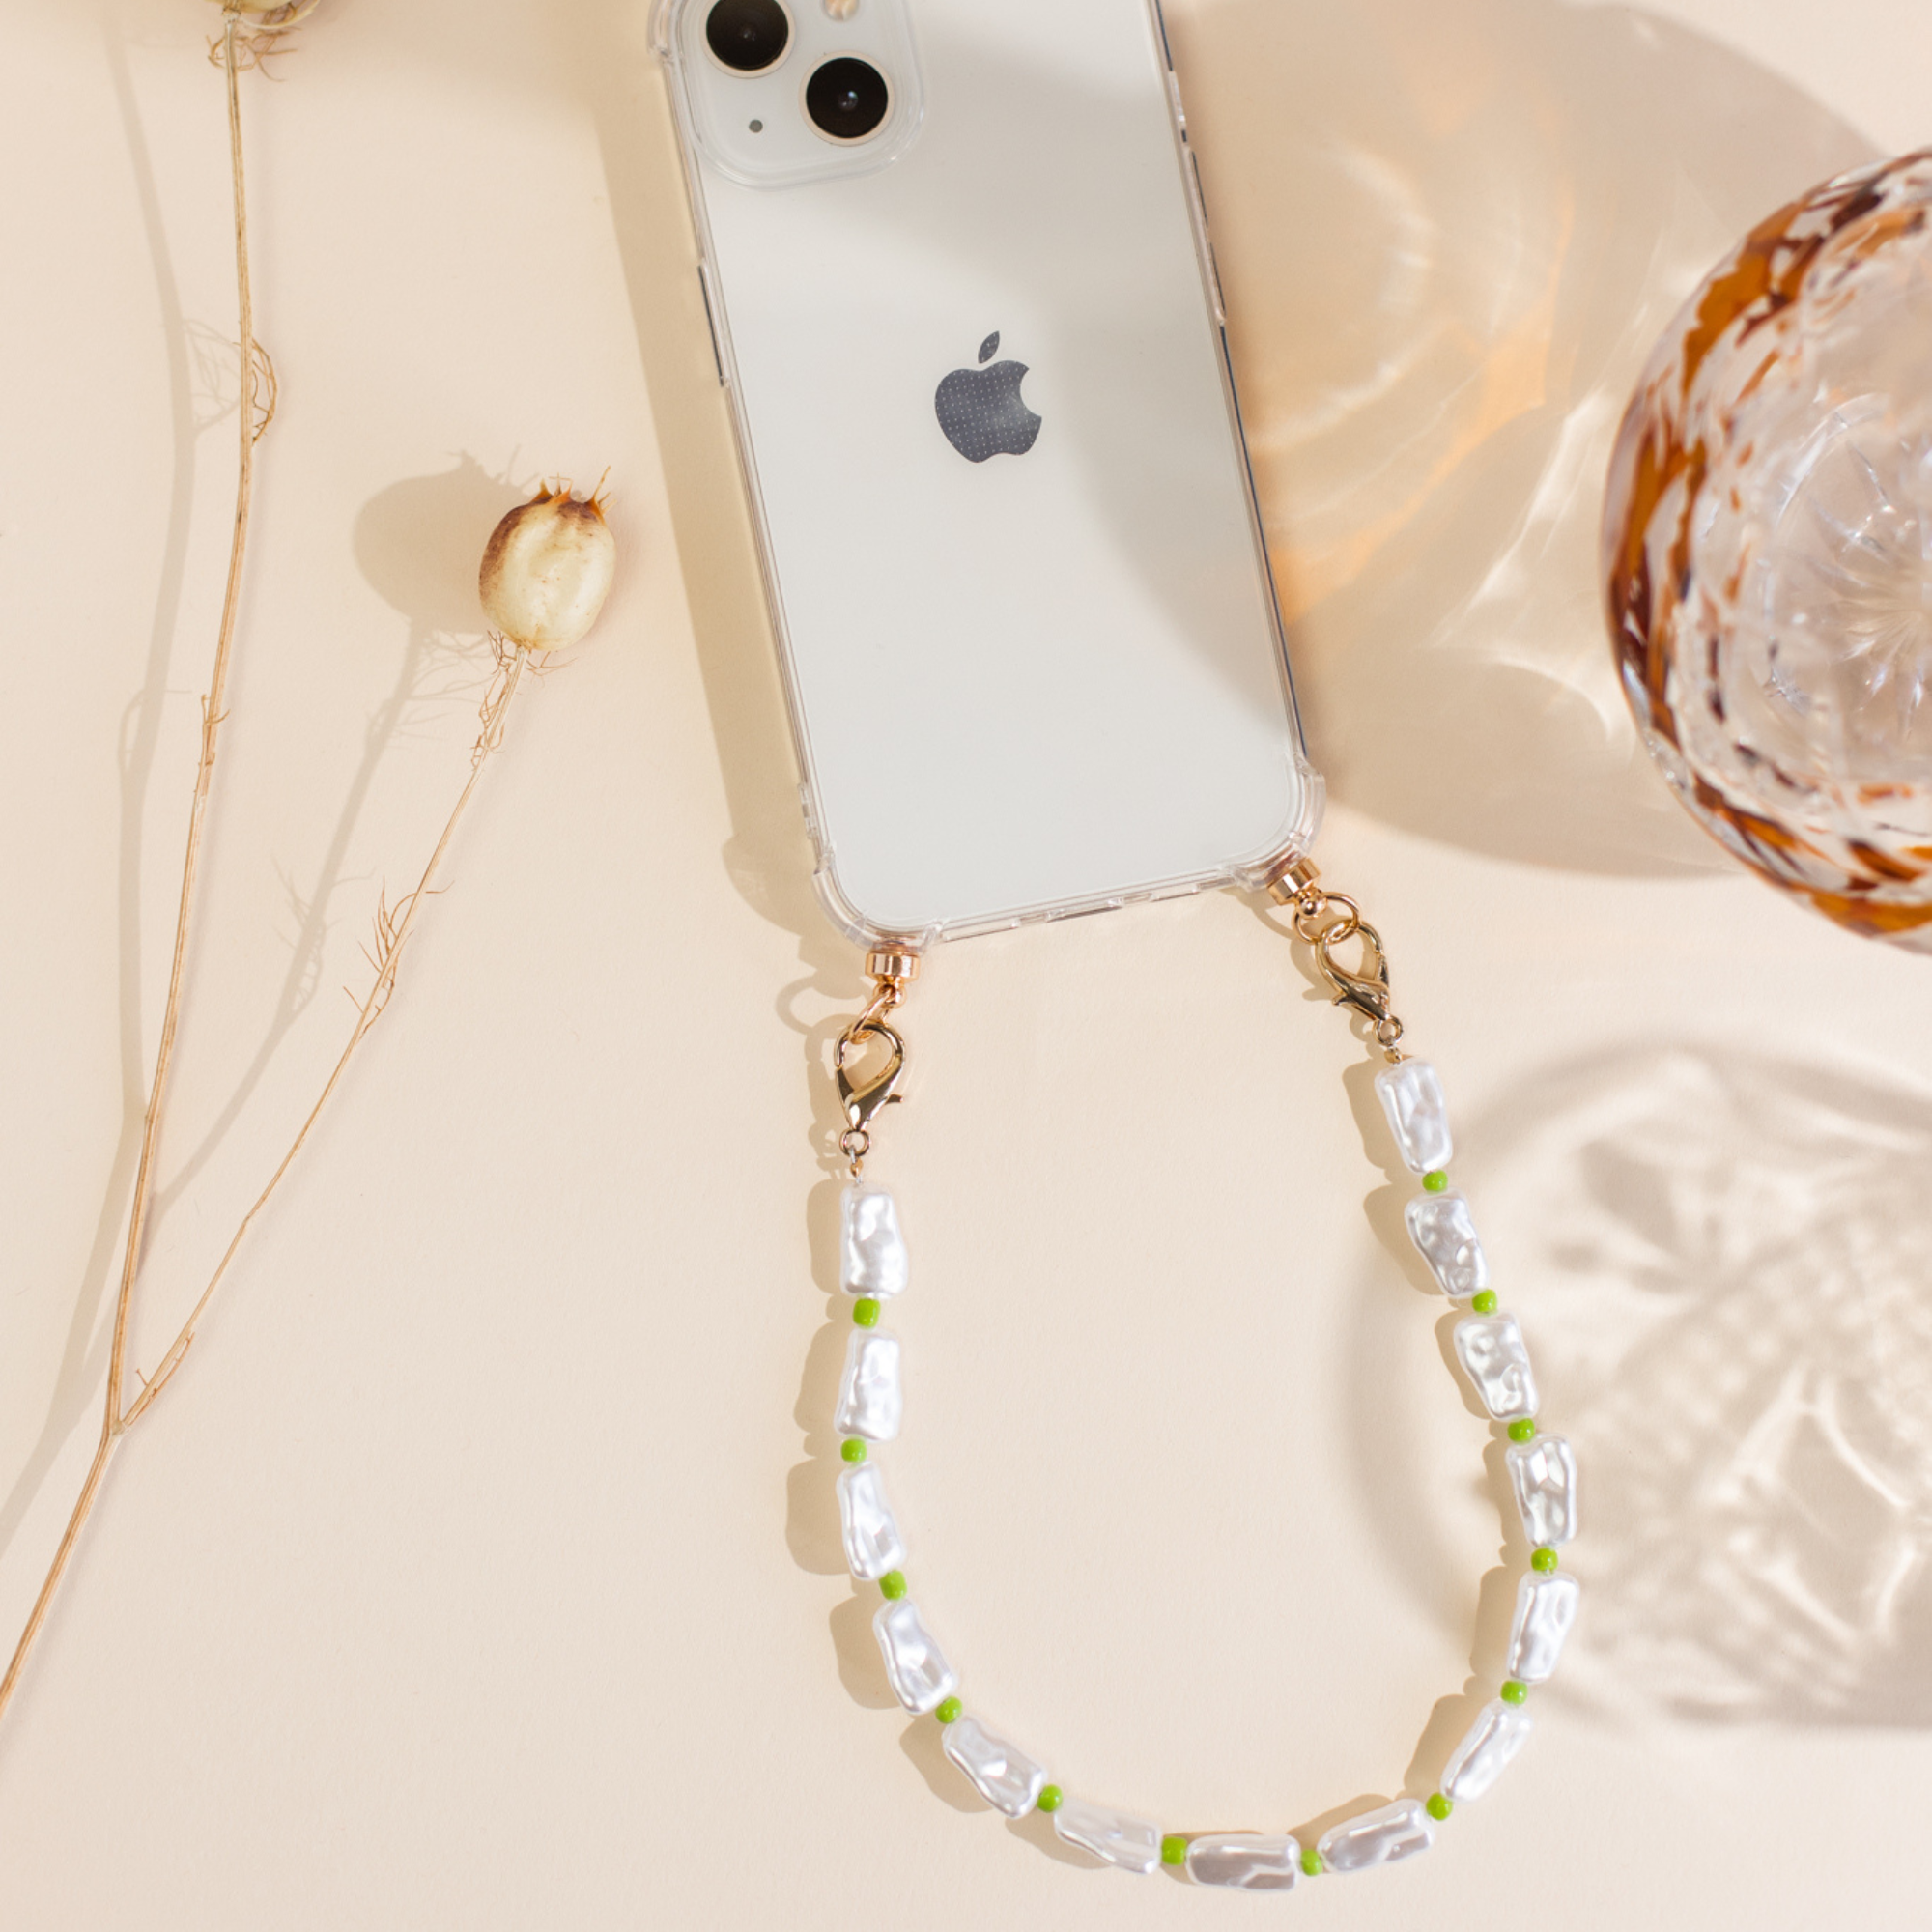 Phone case with green swirl cord